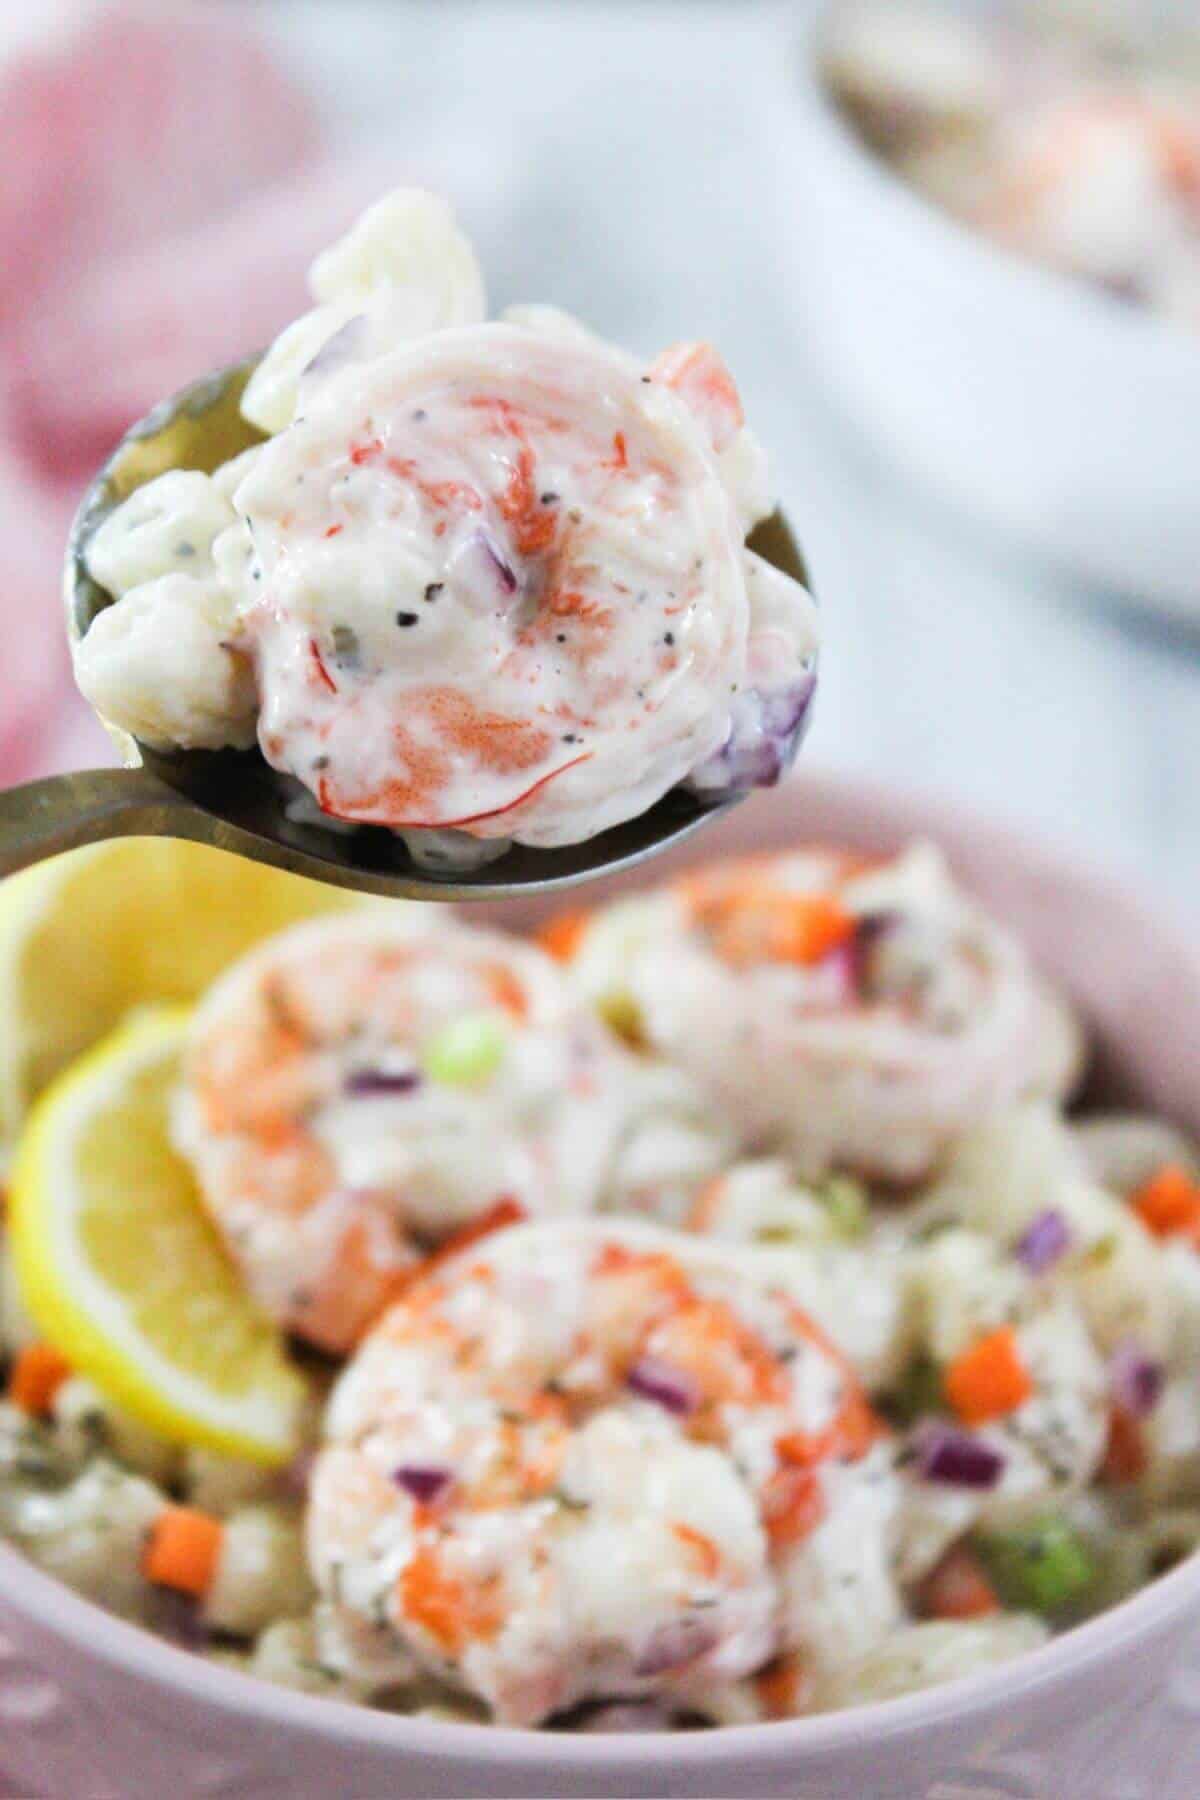 A spoonful of shrimp macaroni salad in a pink bowl.